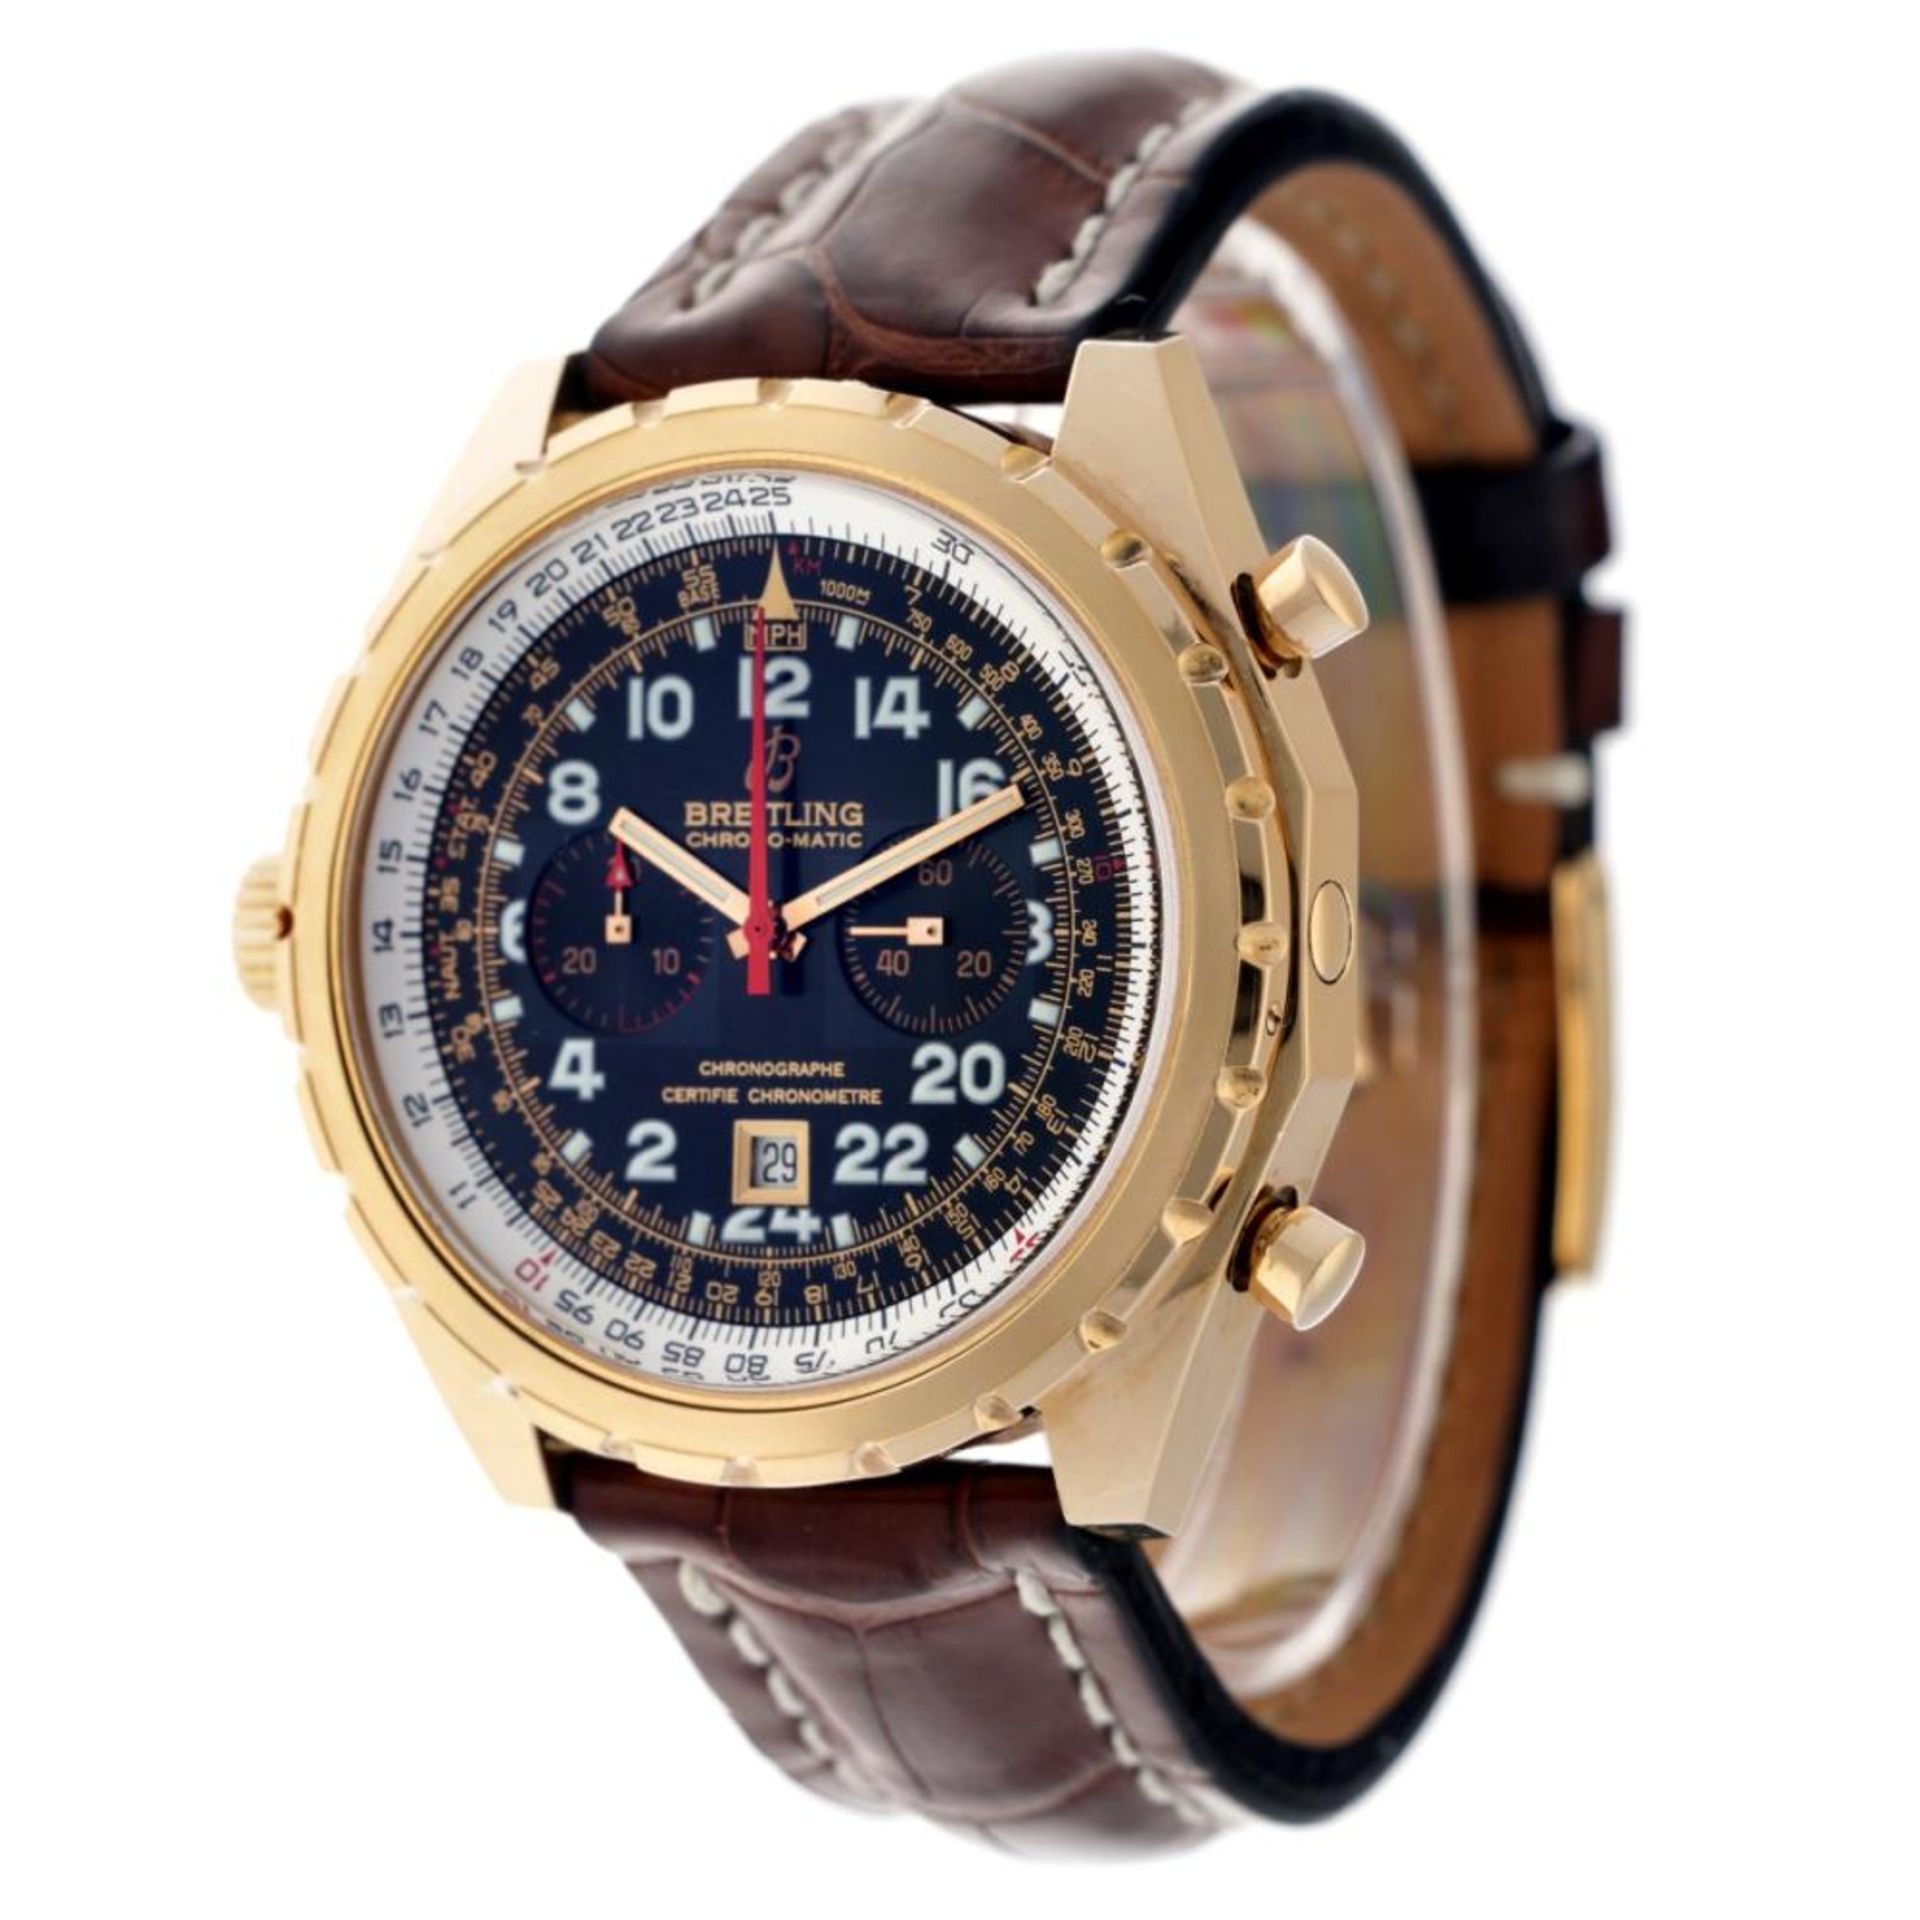 Breitling Chrono-Matic H22360 - Men's watch - 2006. - Image 3 of 12